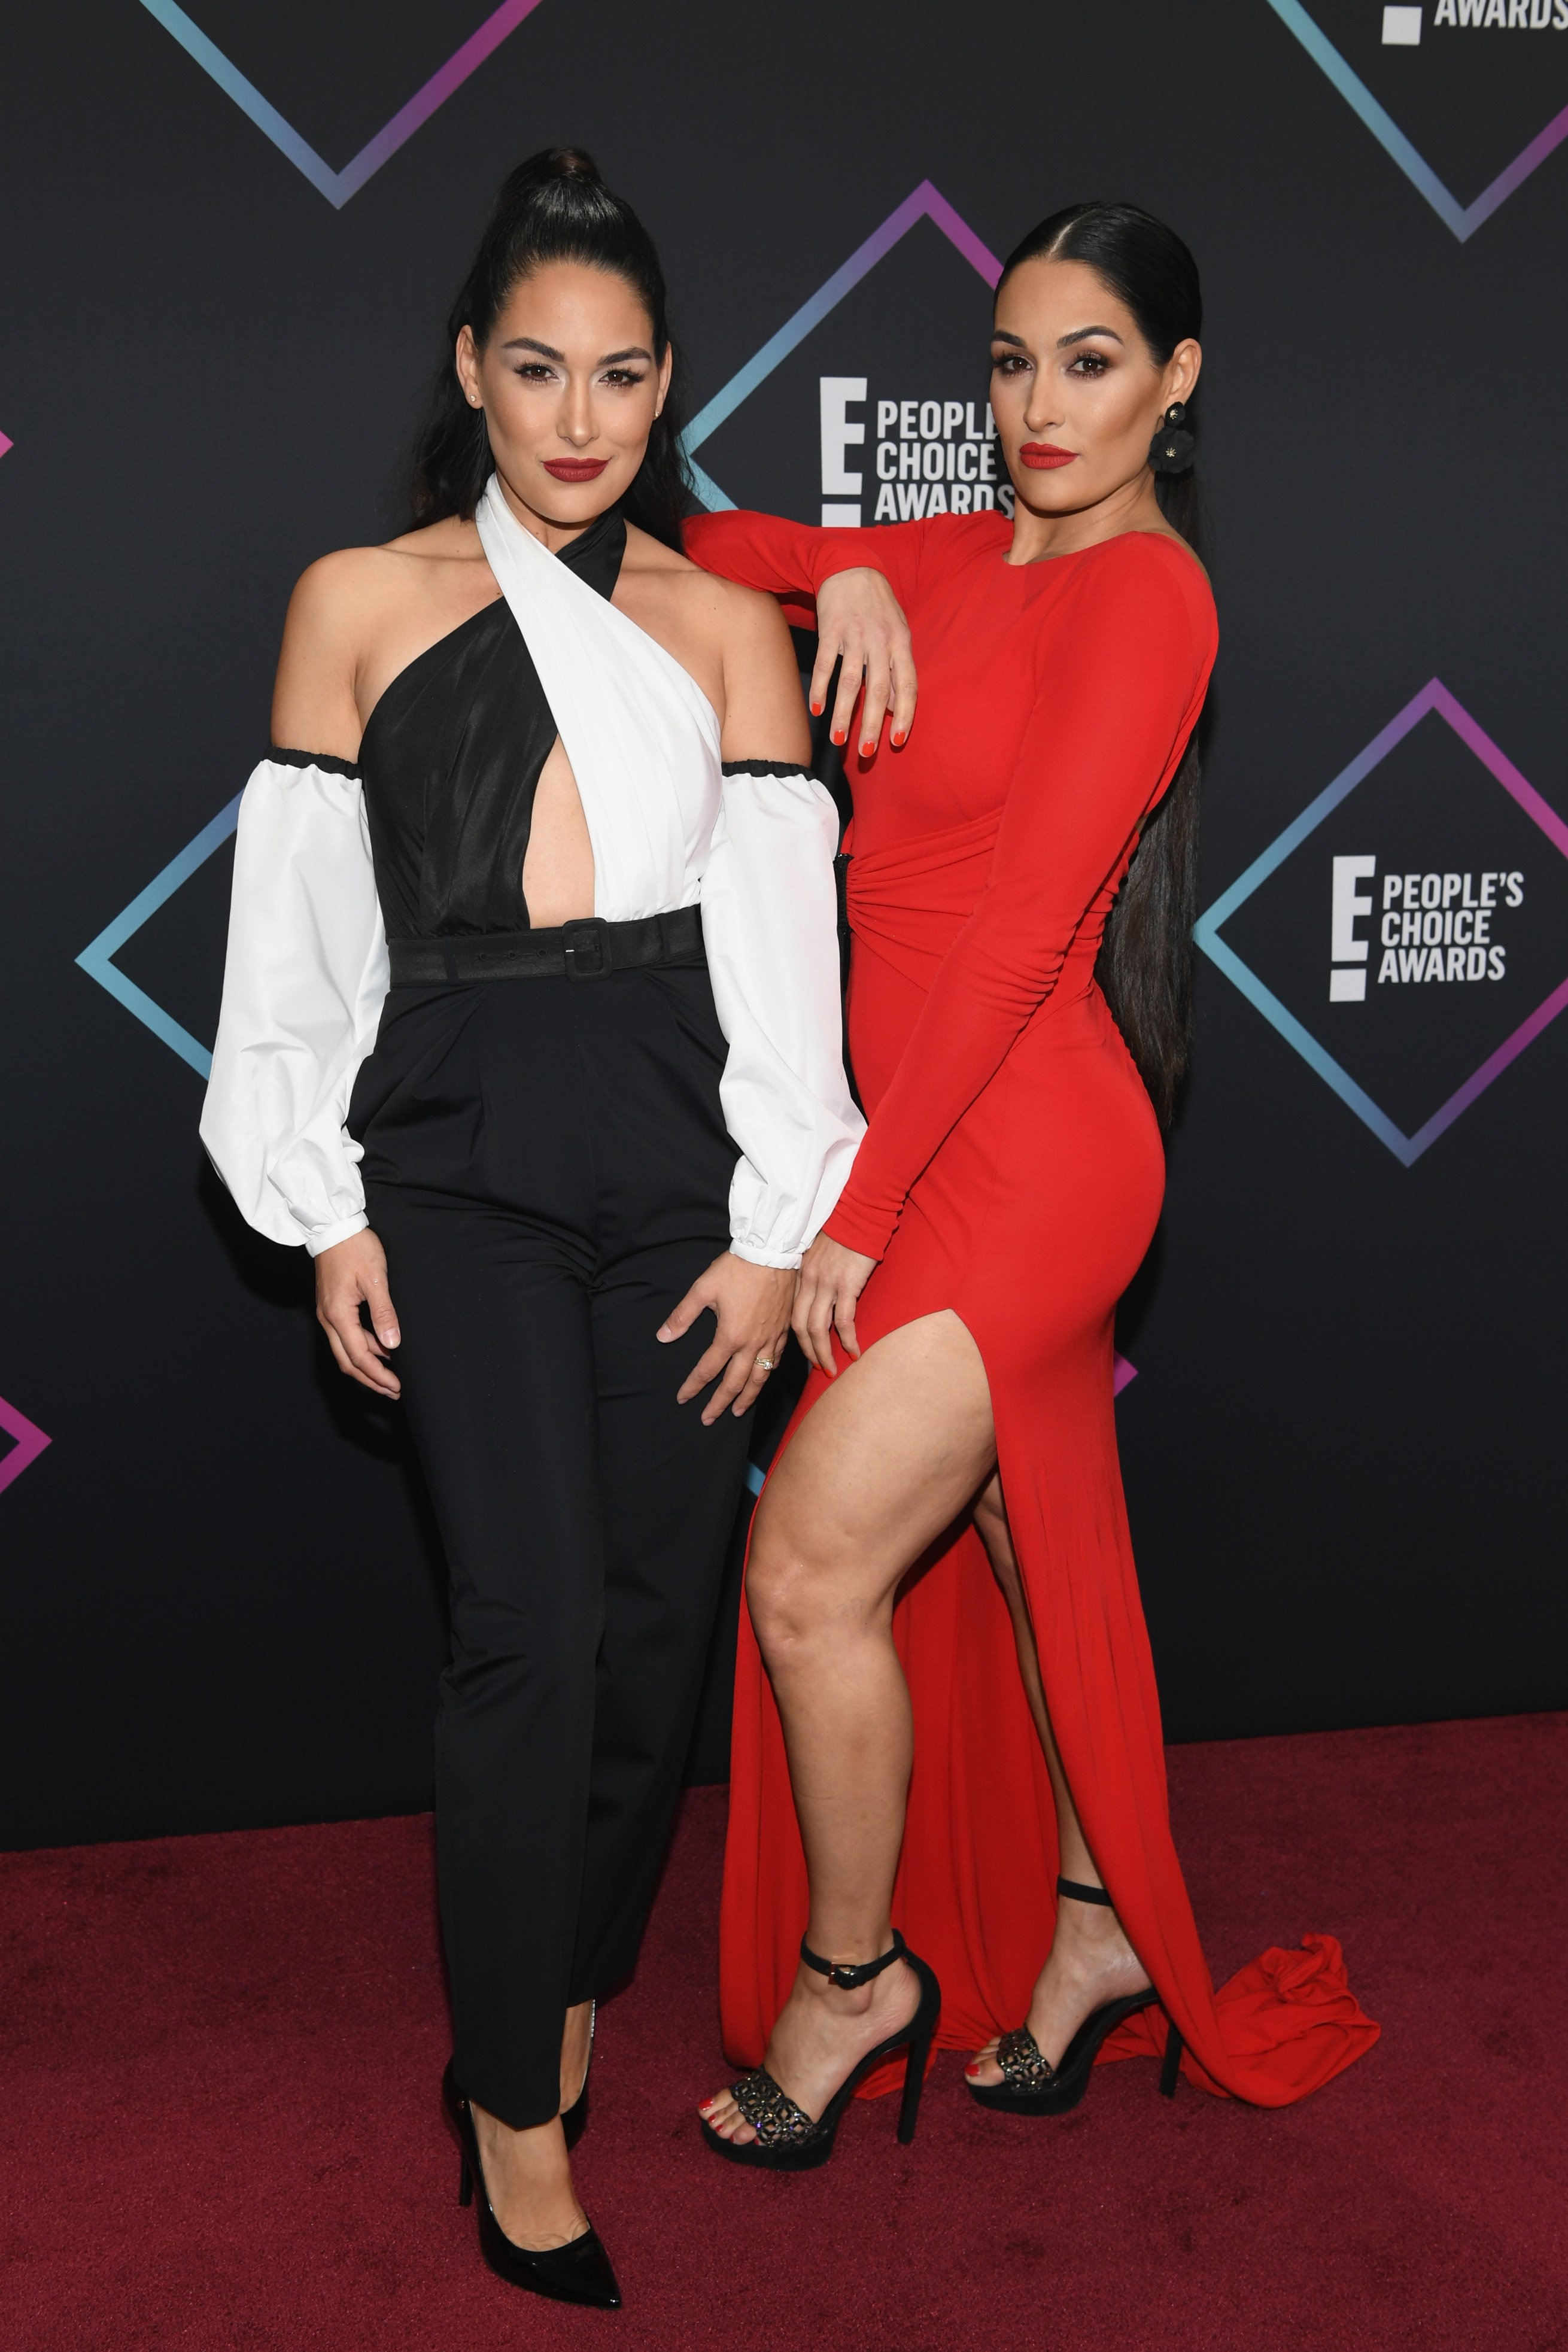 Brie Bella and Nikki Bella arrive to the 2018 E! People's Choice Awards on November 11, 2018. | Source: Getty Images.